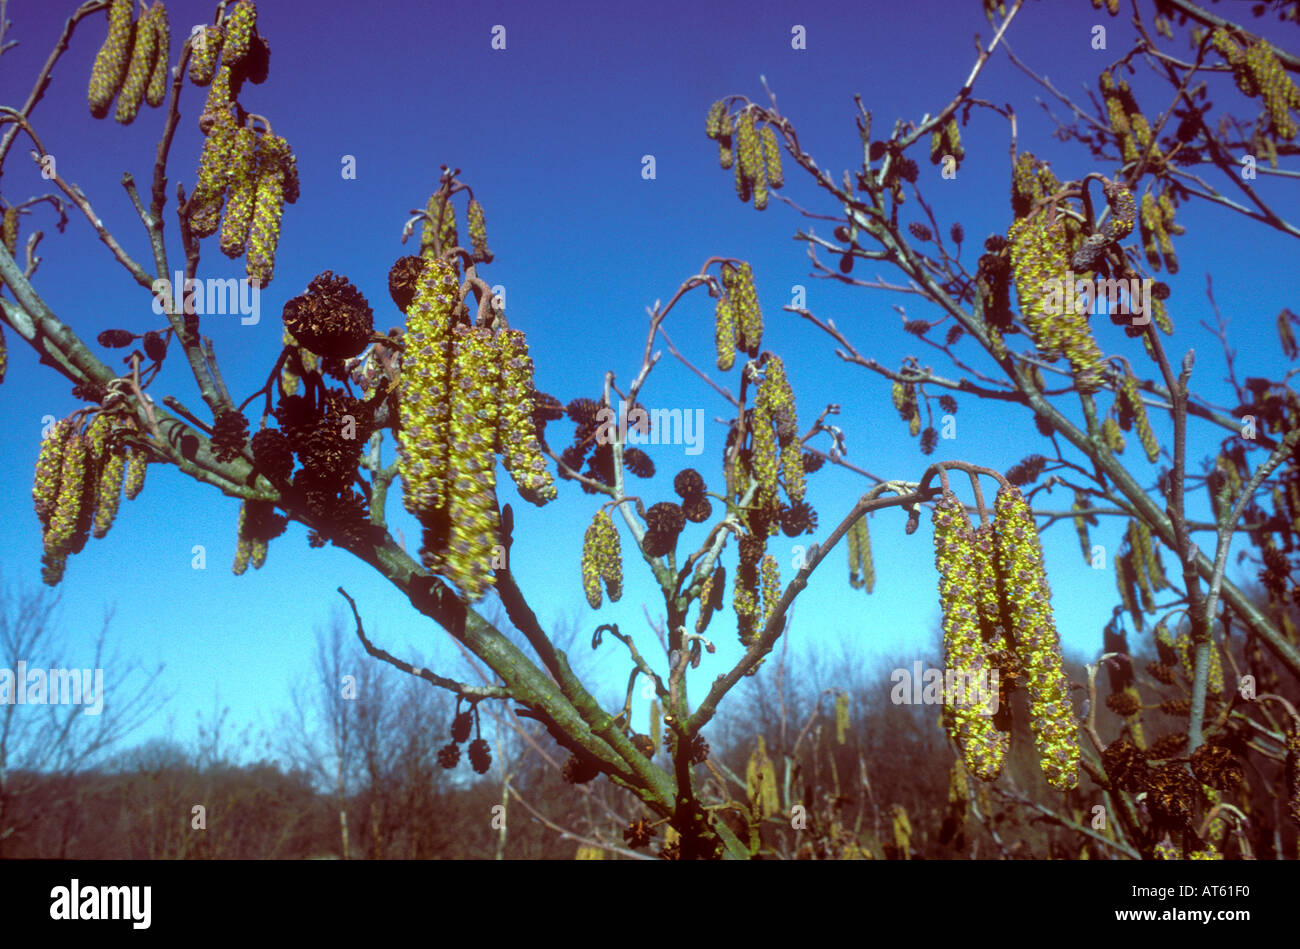 Catkins of the Alder Tree Stock Photo